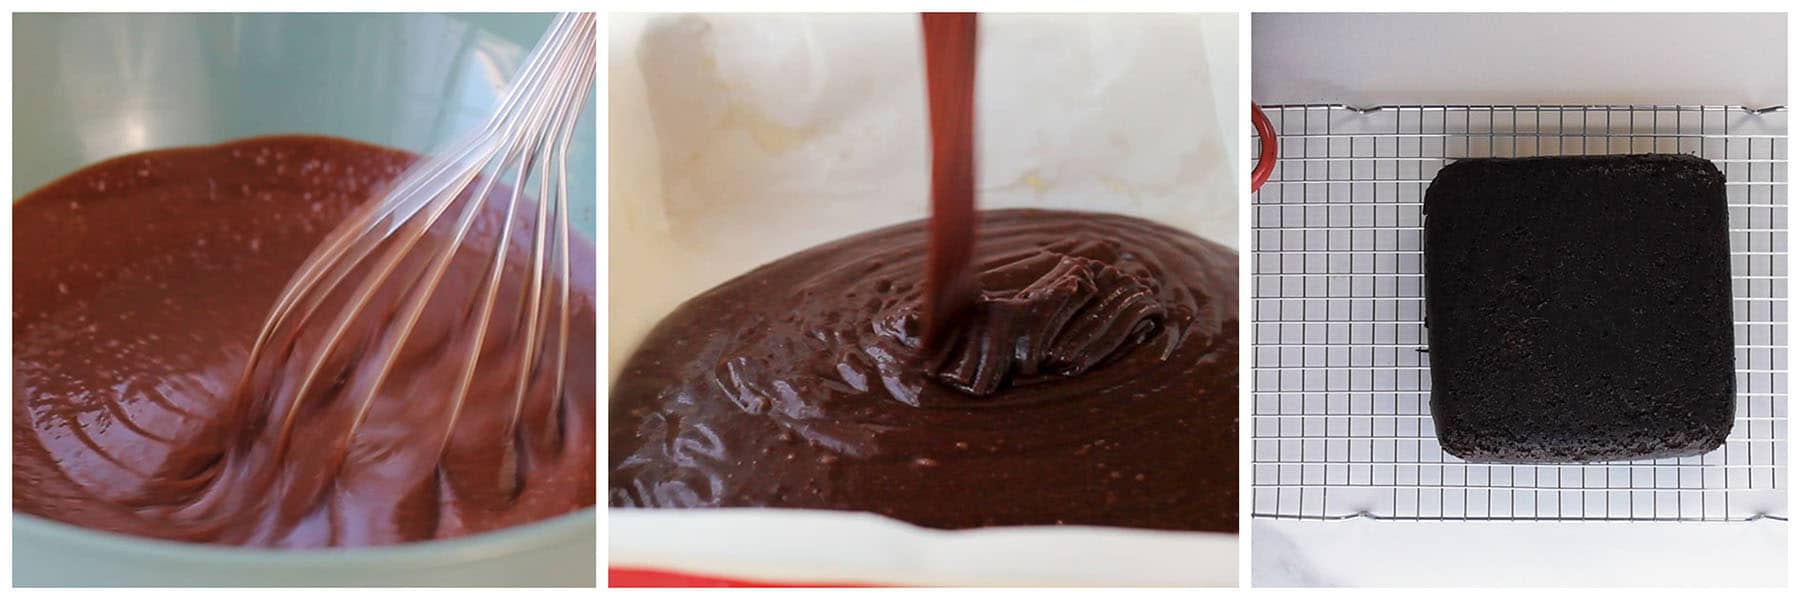 Bake: Bake for 15 to 20 minutes or until a skewer inserted in the centre of the cake comes out clean. Cool: Remove from the oven and leave to cool in the pan for 10 minutes before turning out onto a cooling rack. Allow to cool completely before frosting if preferred.